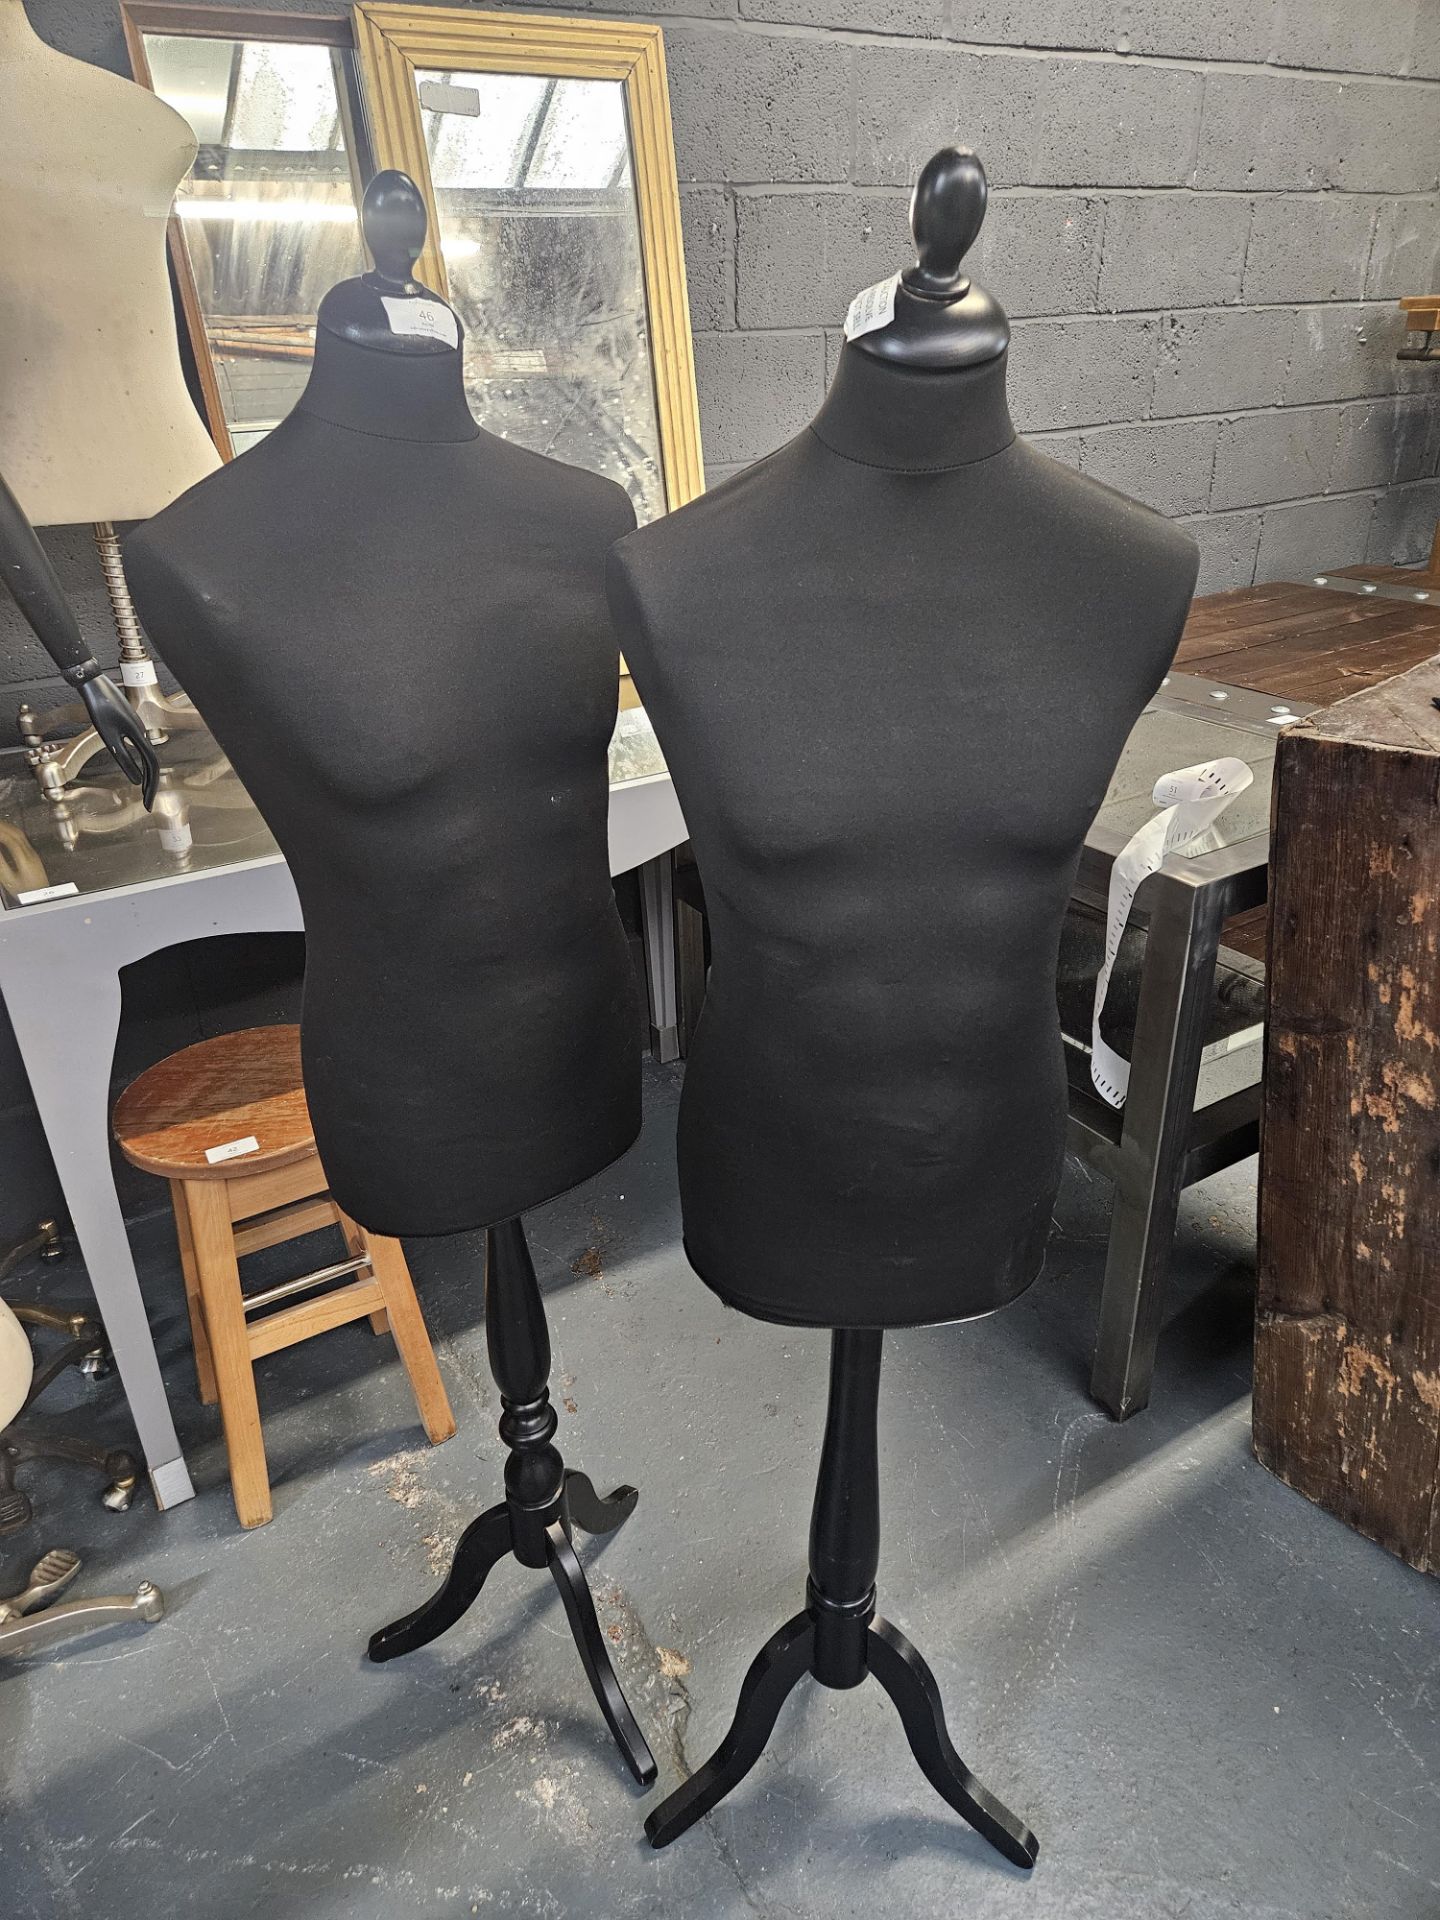 Lightweight Mannequin Busts On Stands x2